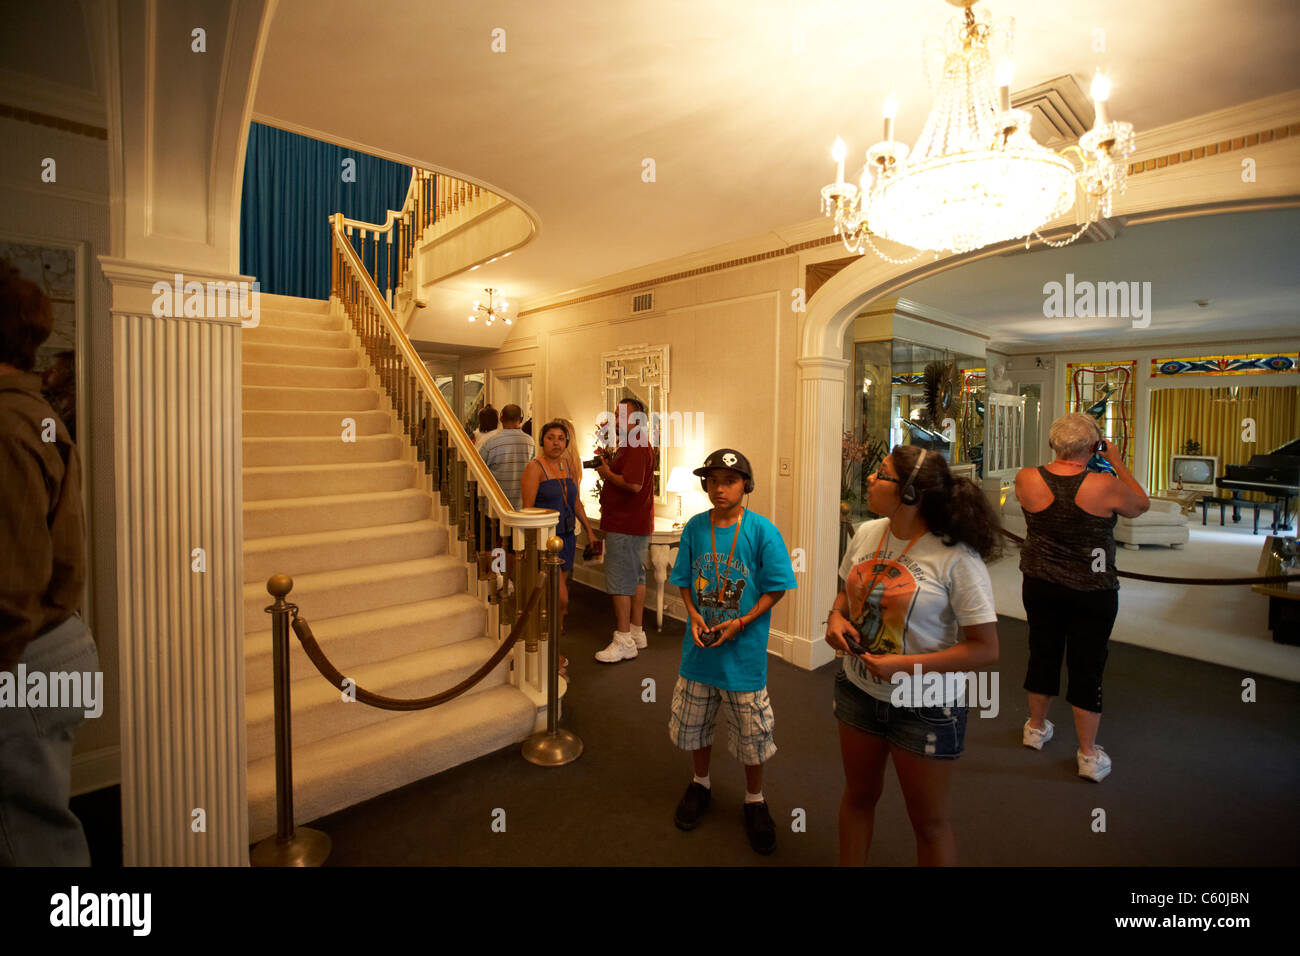 tourists visit graceland mansion with upstairs roped off memphis tennessee usa Stock Photo